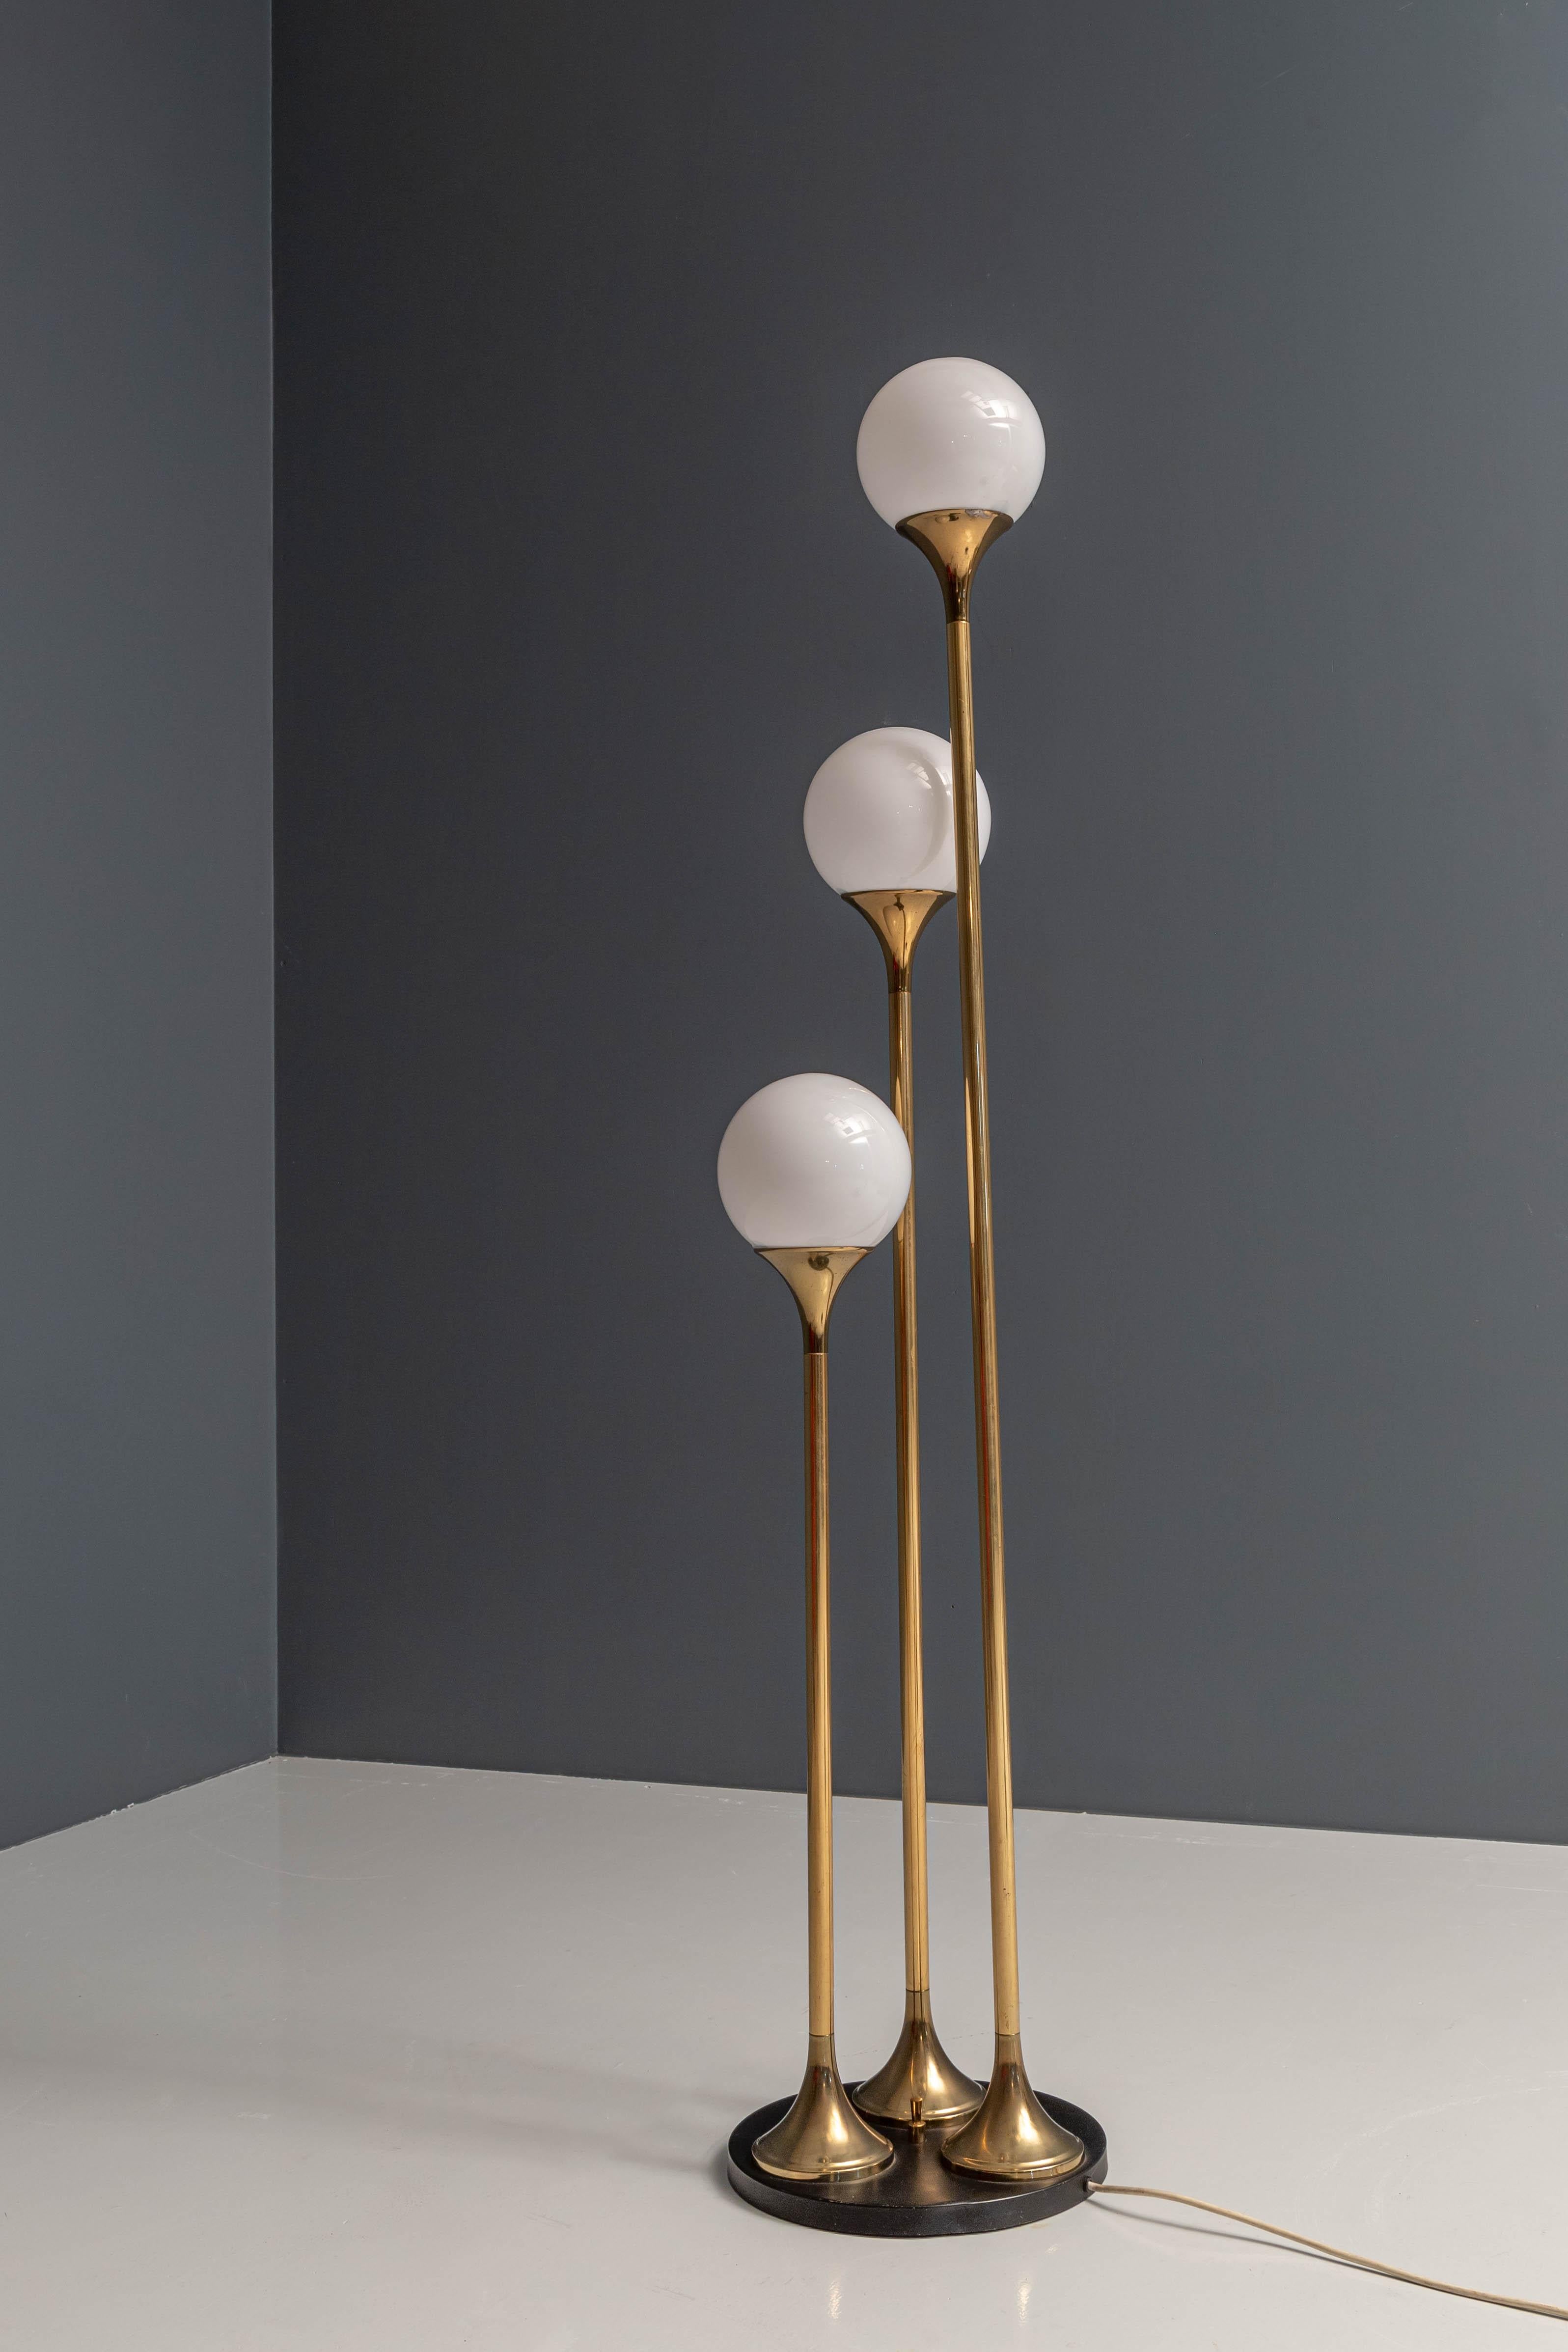 An elegant and smooth floor lamp from Italy. Good choice and mix of materials: brass, metal and white glass, creating the typical Italian ambiance of design and luxurious well thought over interiors.